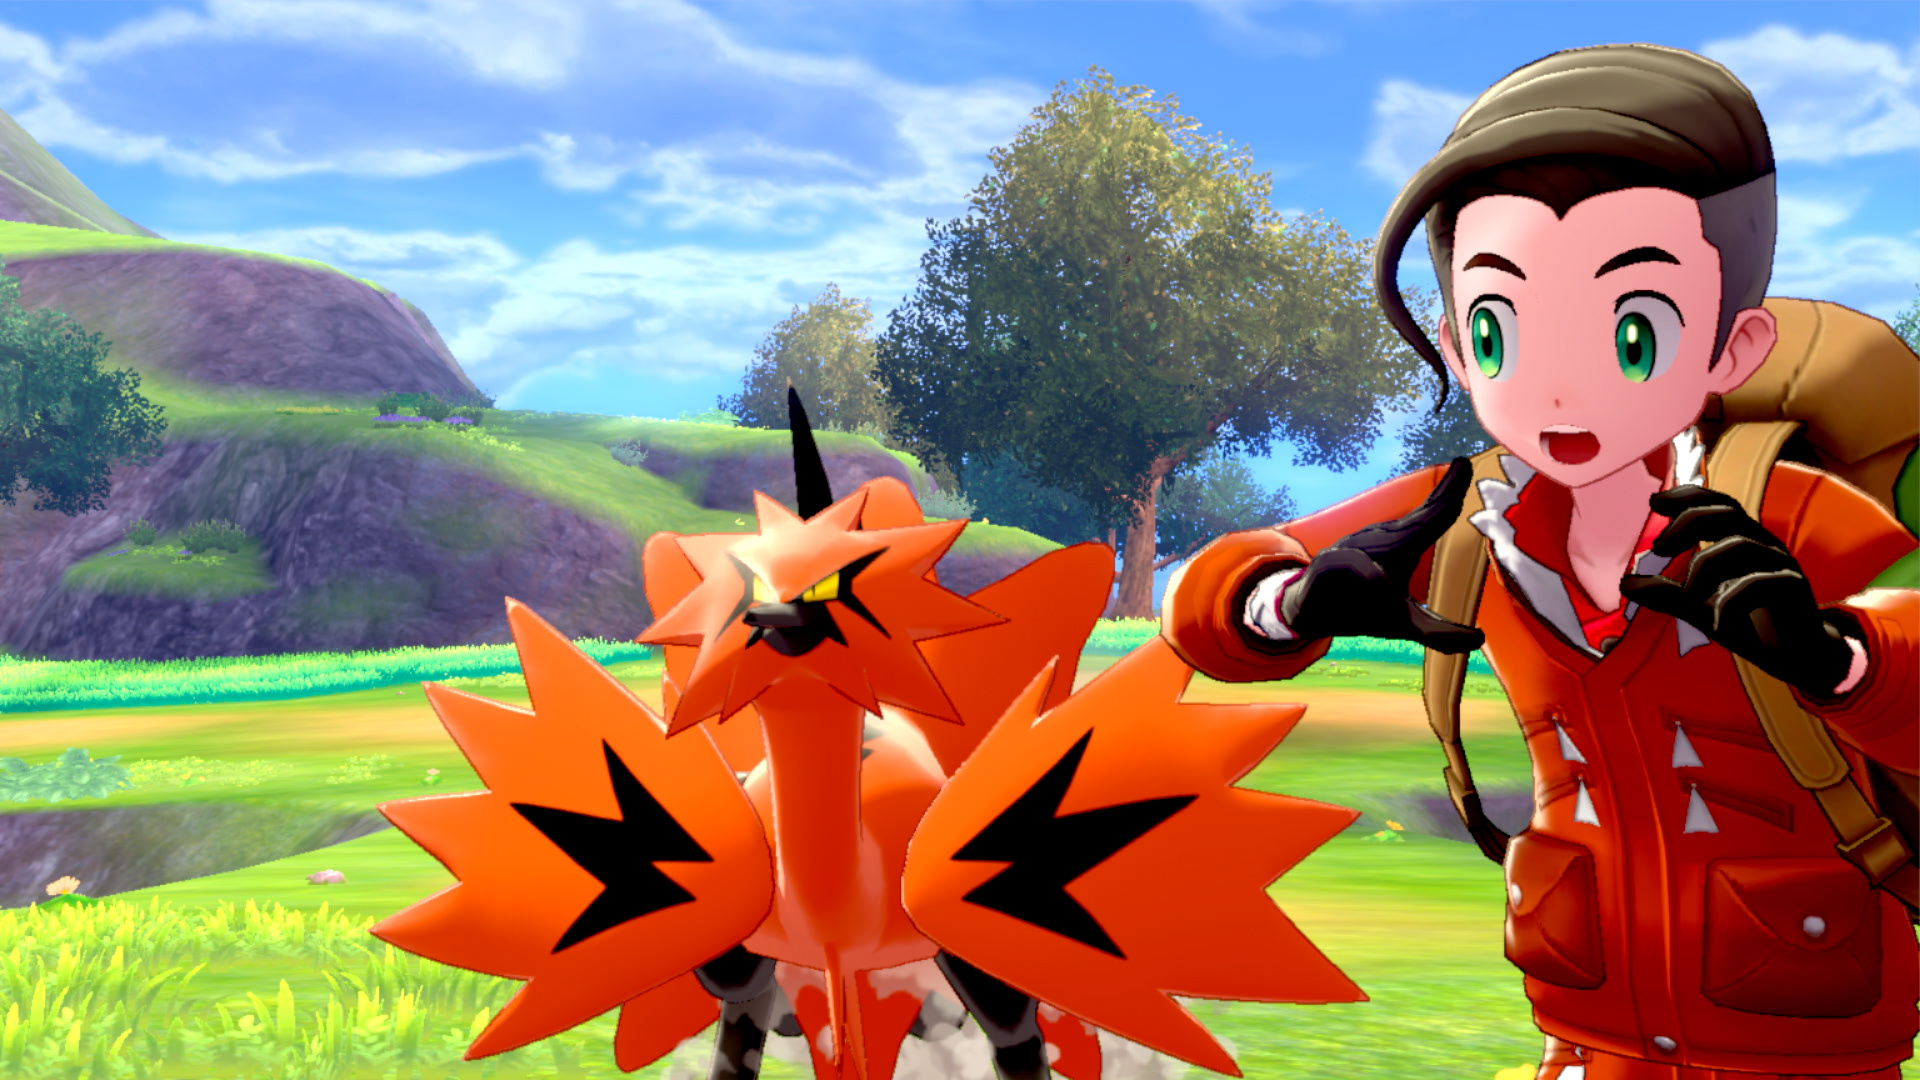 Pokémon Sword and Shield Crown Tundra Expansion Is Here